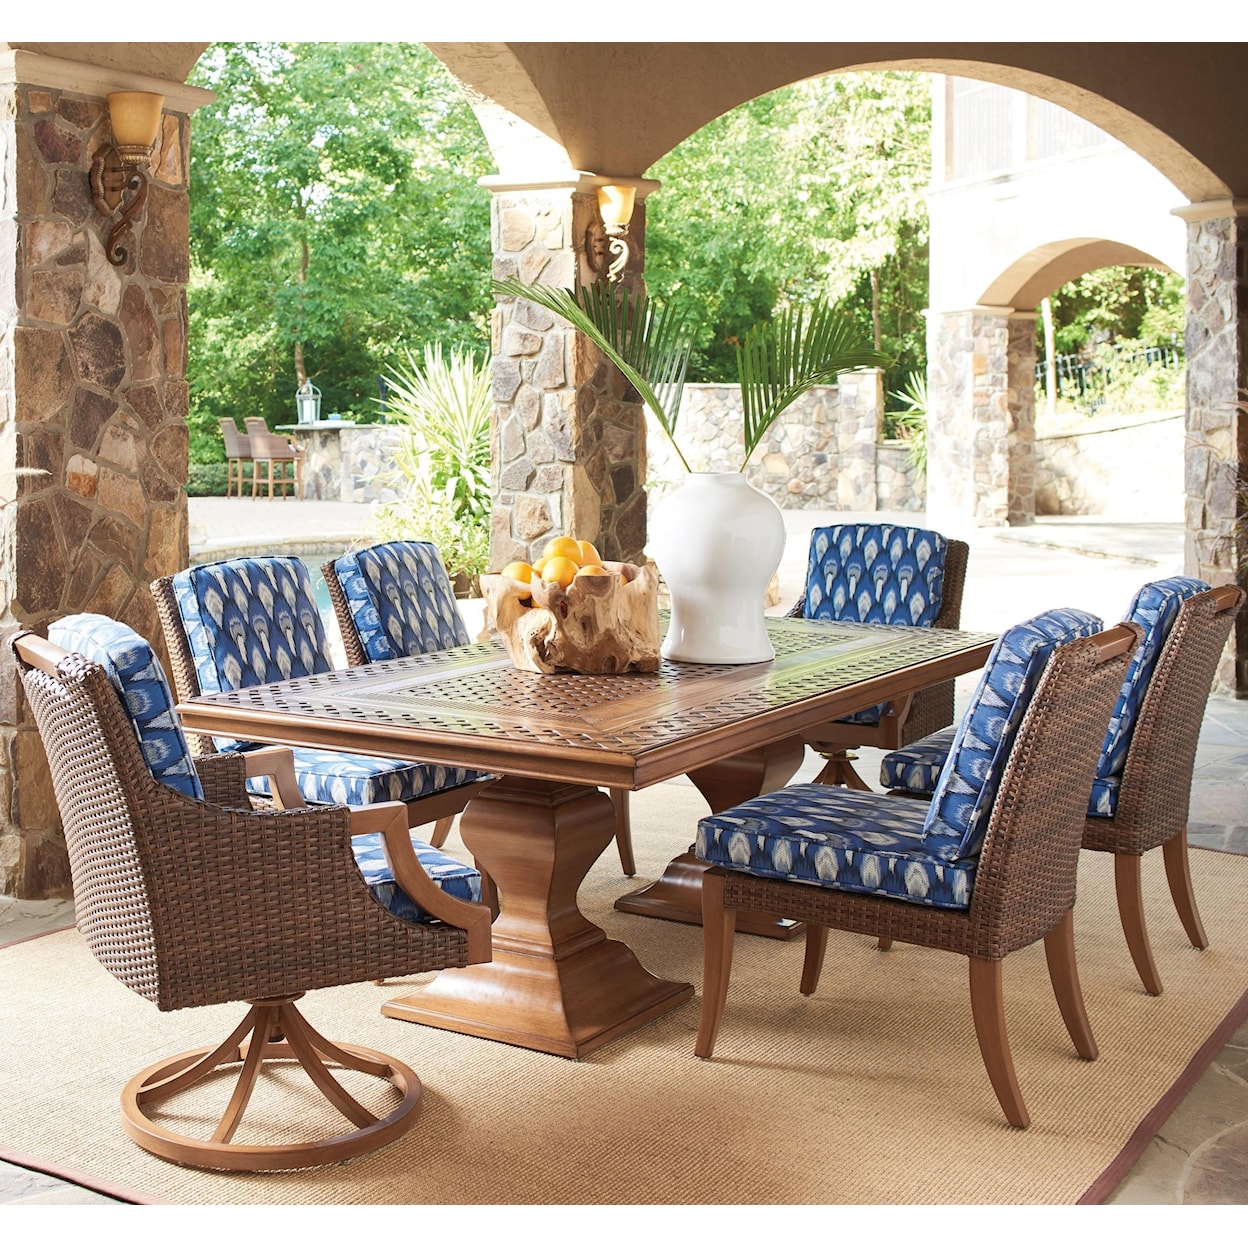 Tommy Bahama Outdoor Living Harbor Isle 7-Piece Outdoor Dining Set